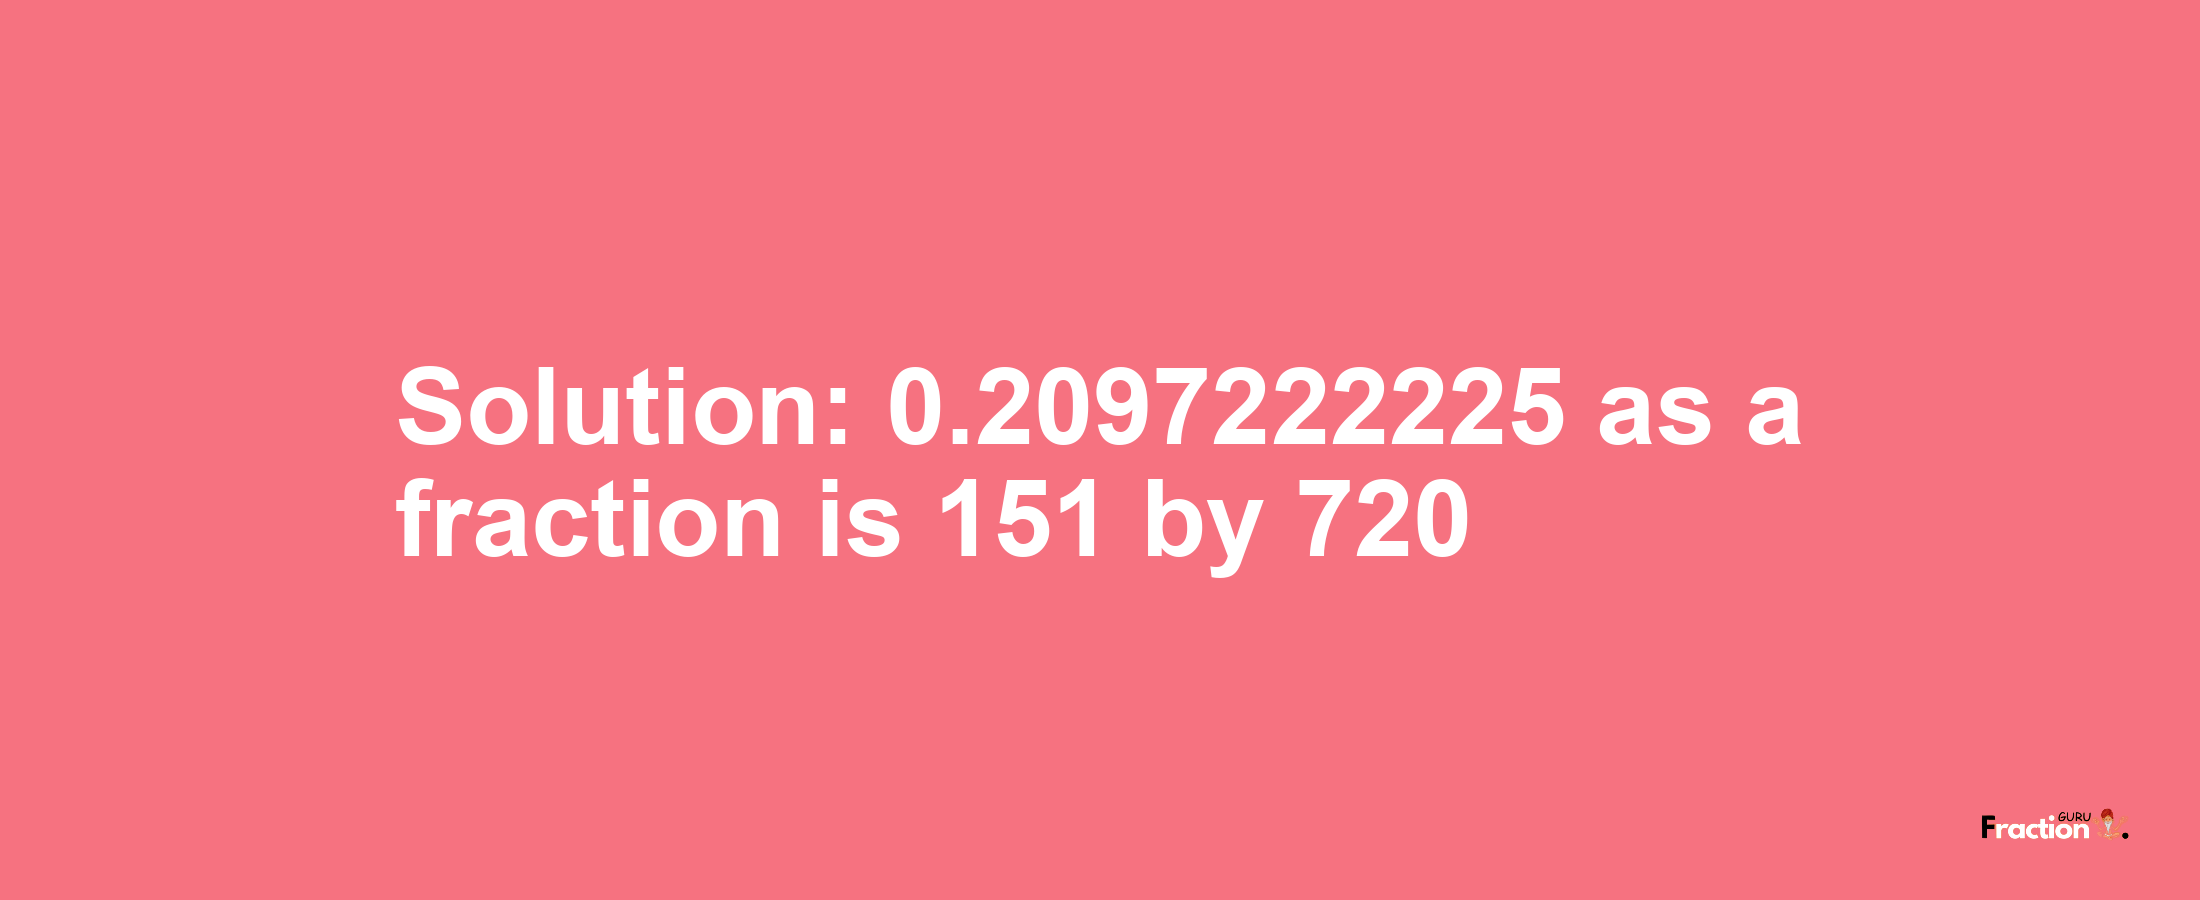 Solution:0.2097222225 as a fraction is 151/720